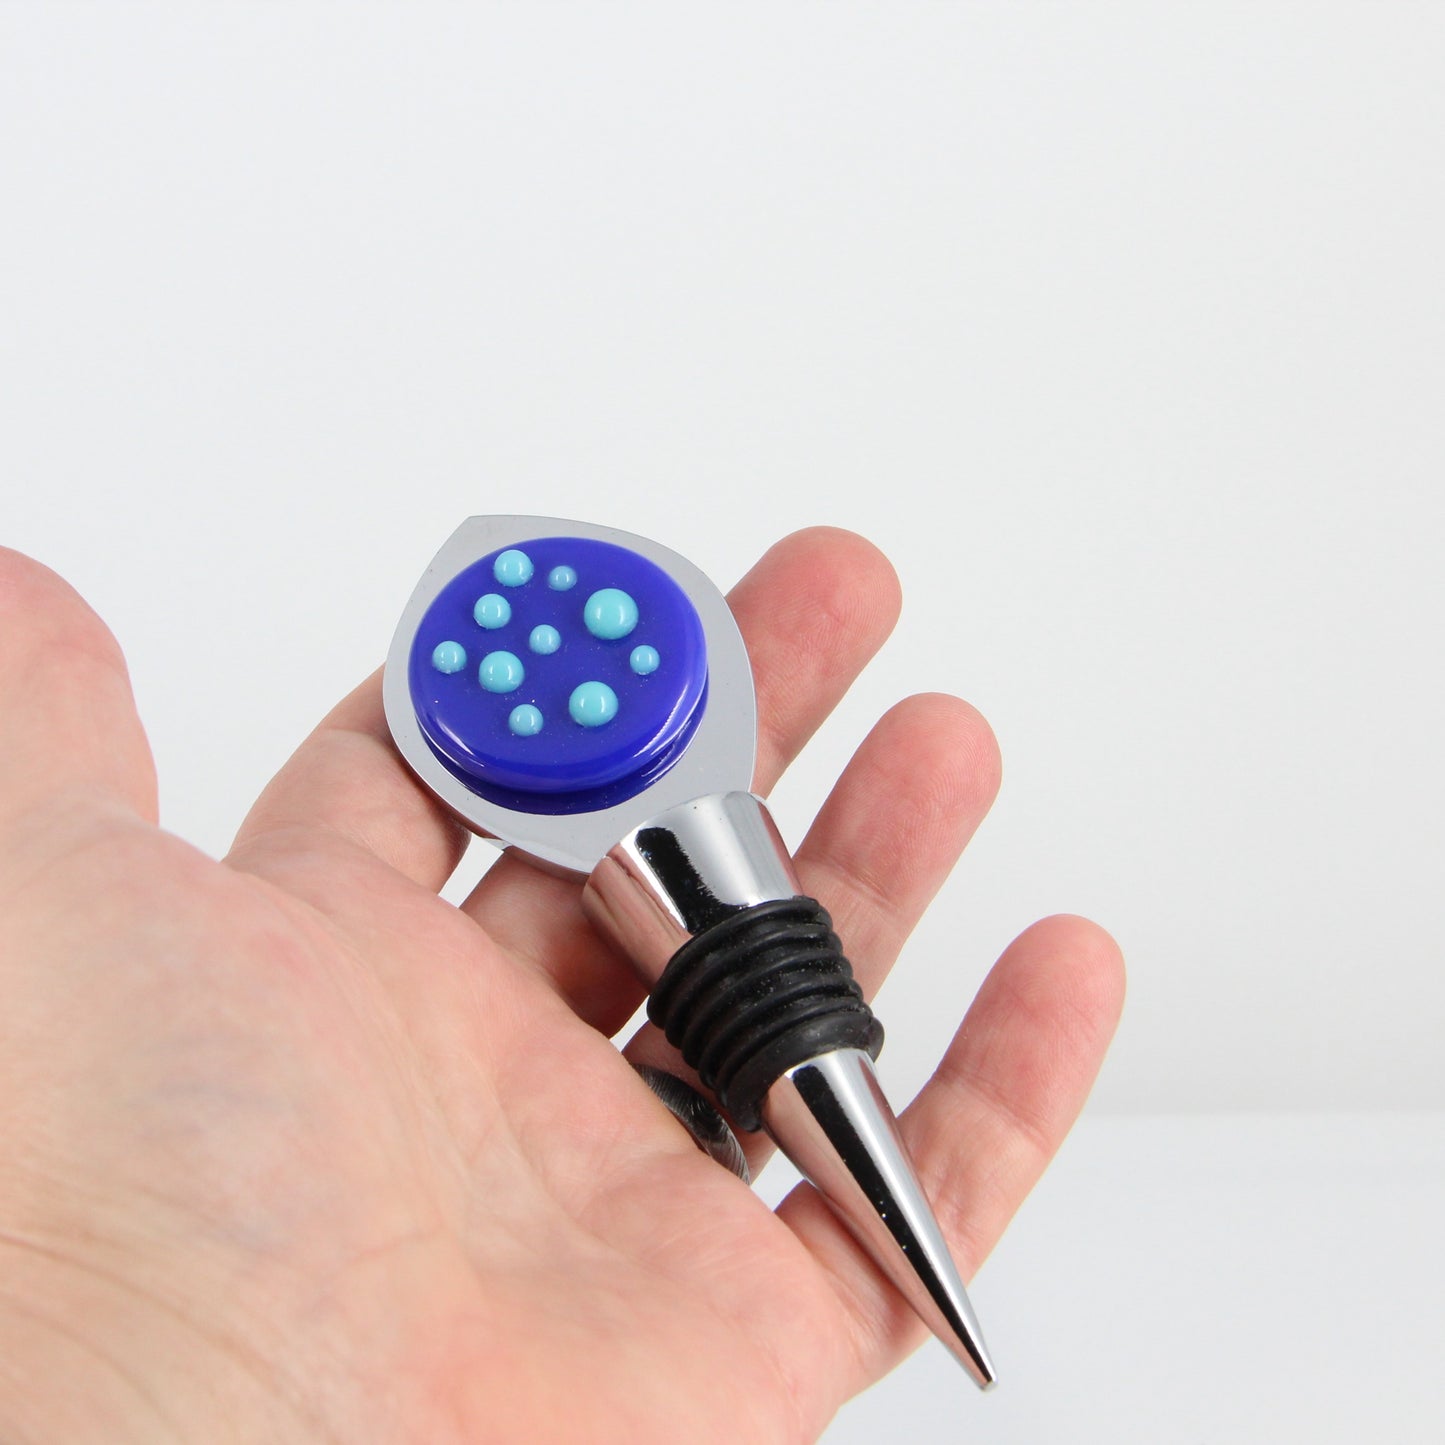 Decorative Wine Stopper with Blue and Aqua Glass Accents